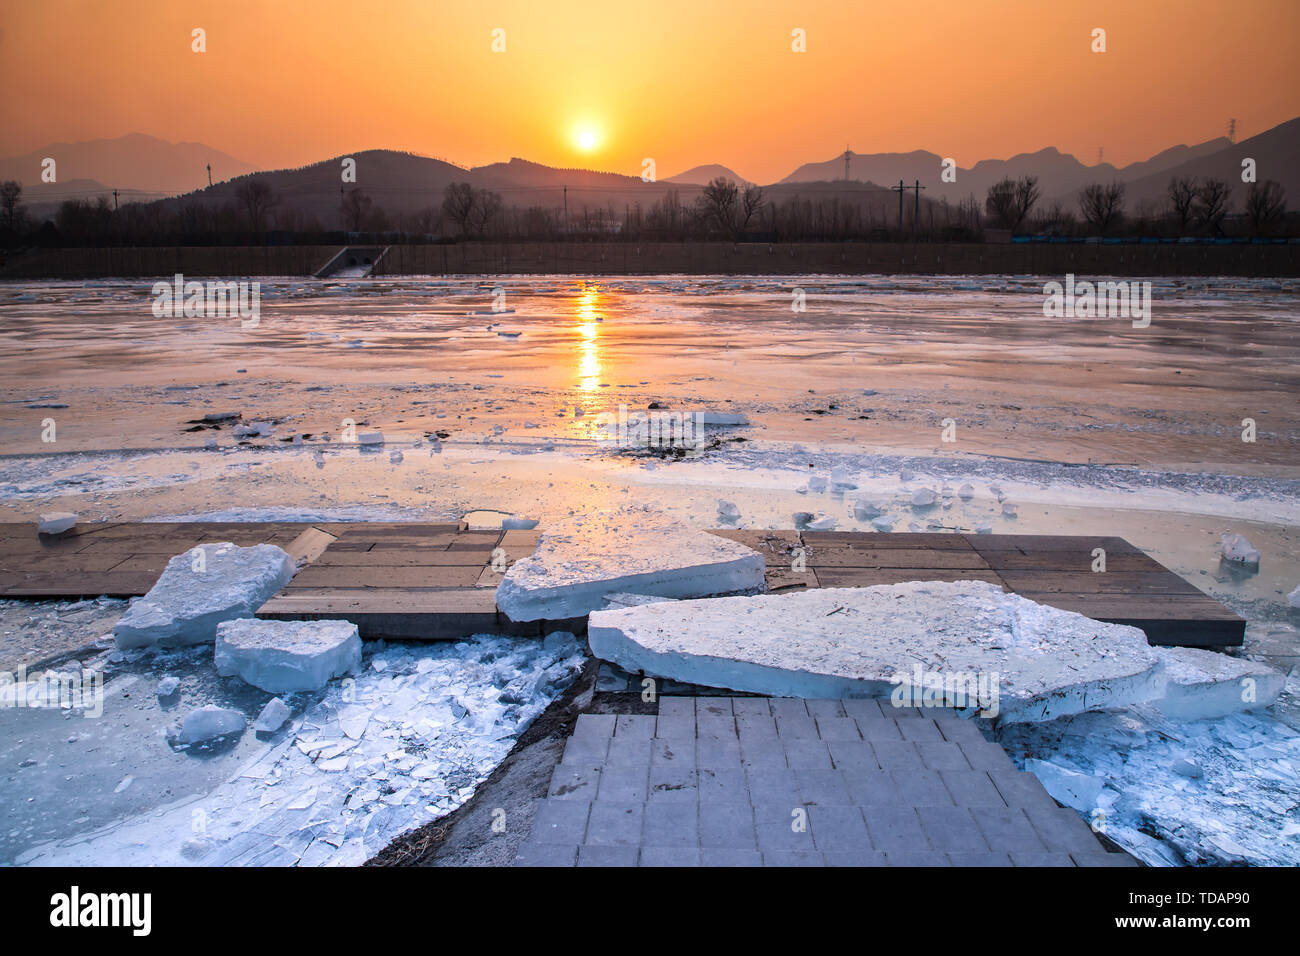 The Yongding River in winter Stock Photo